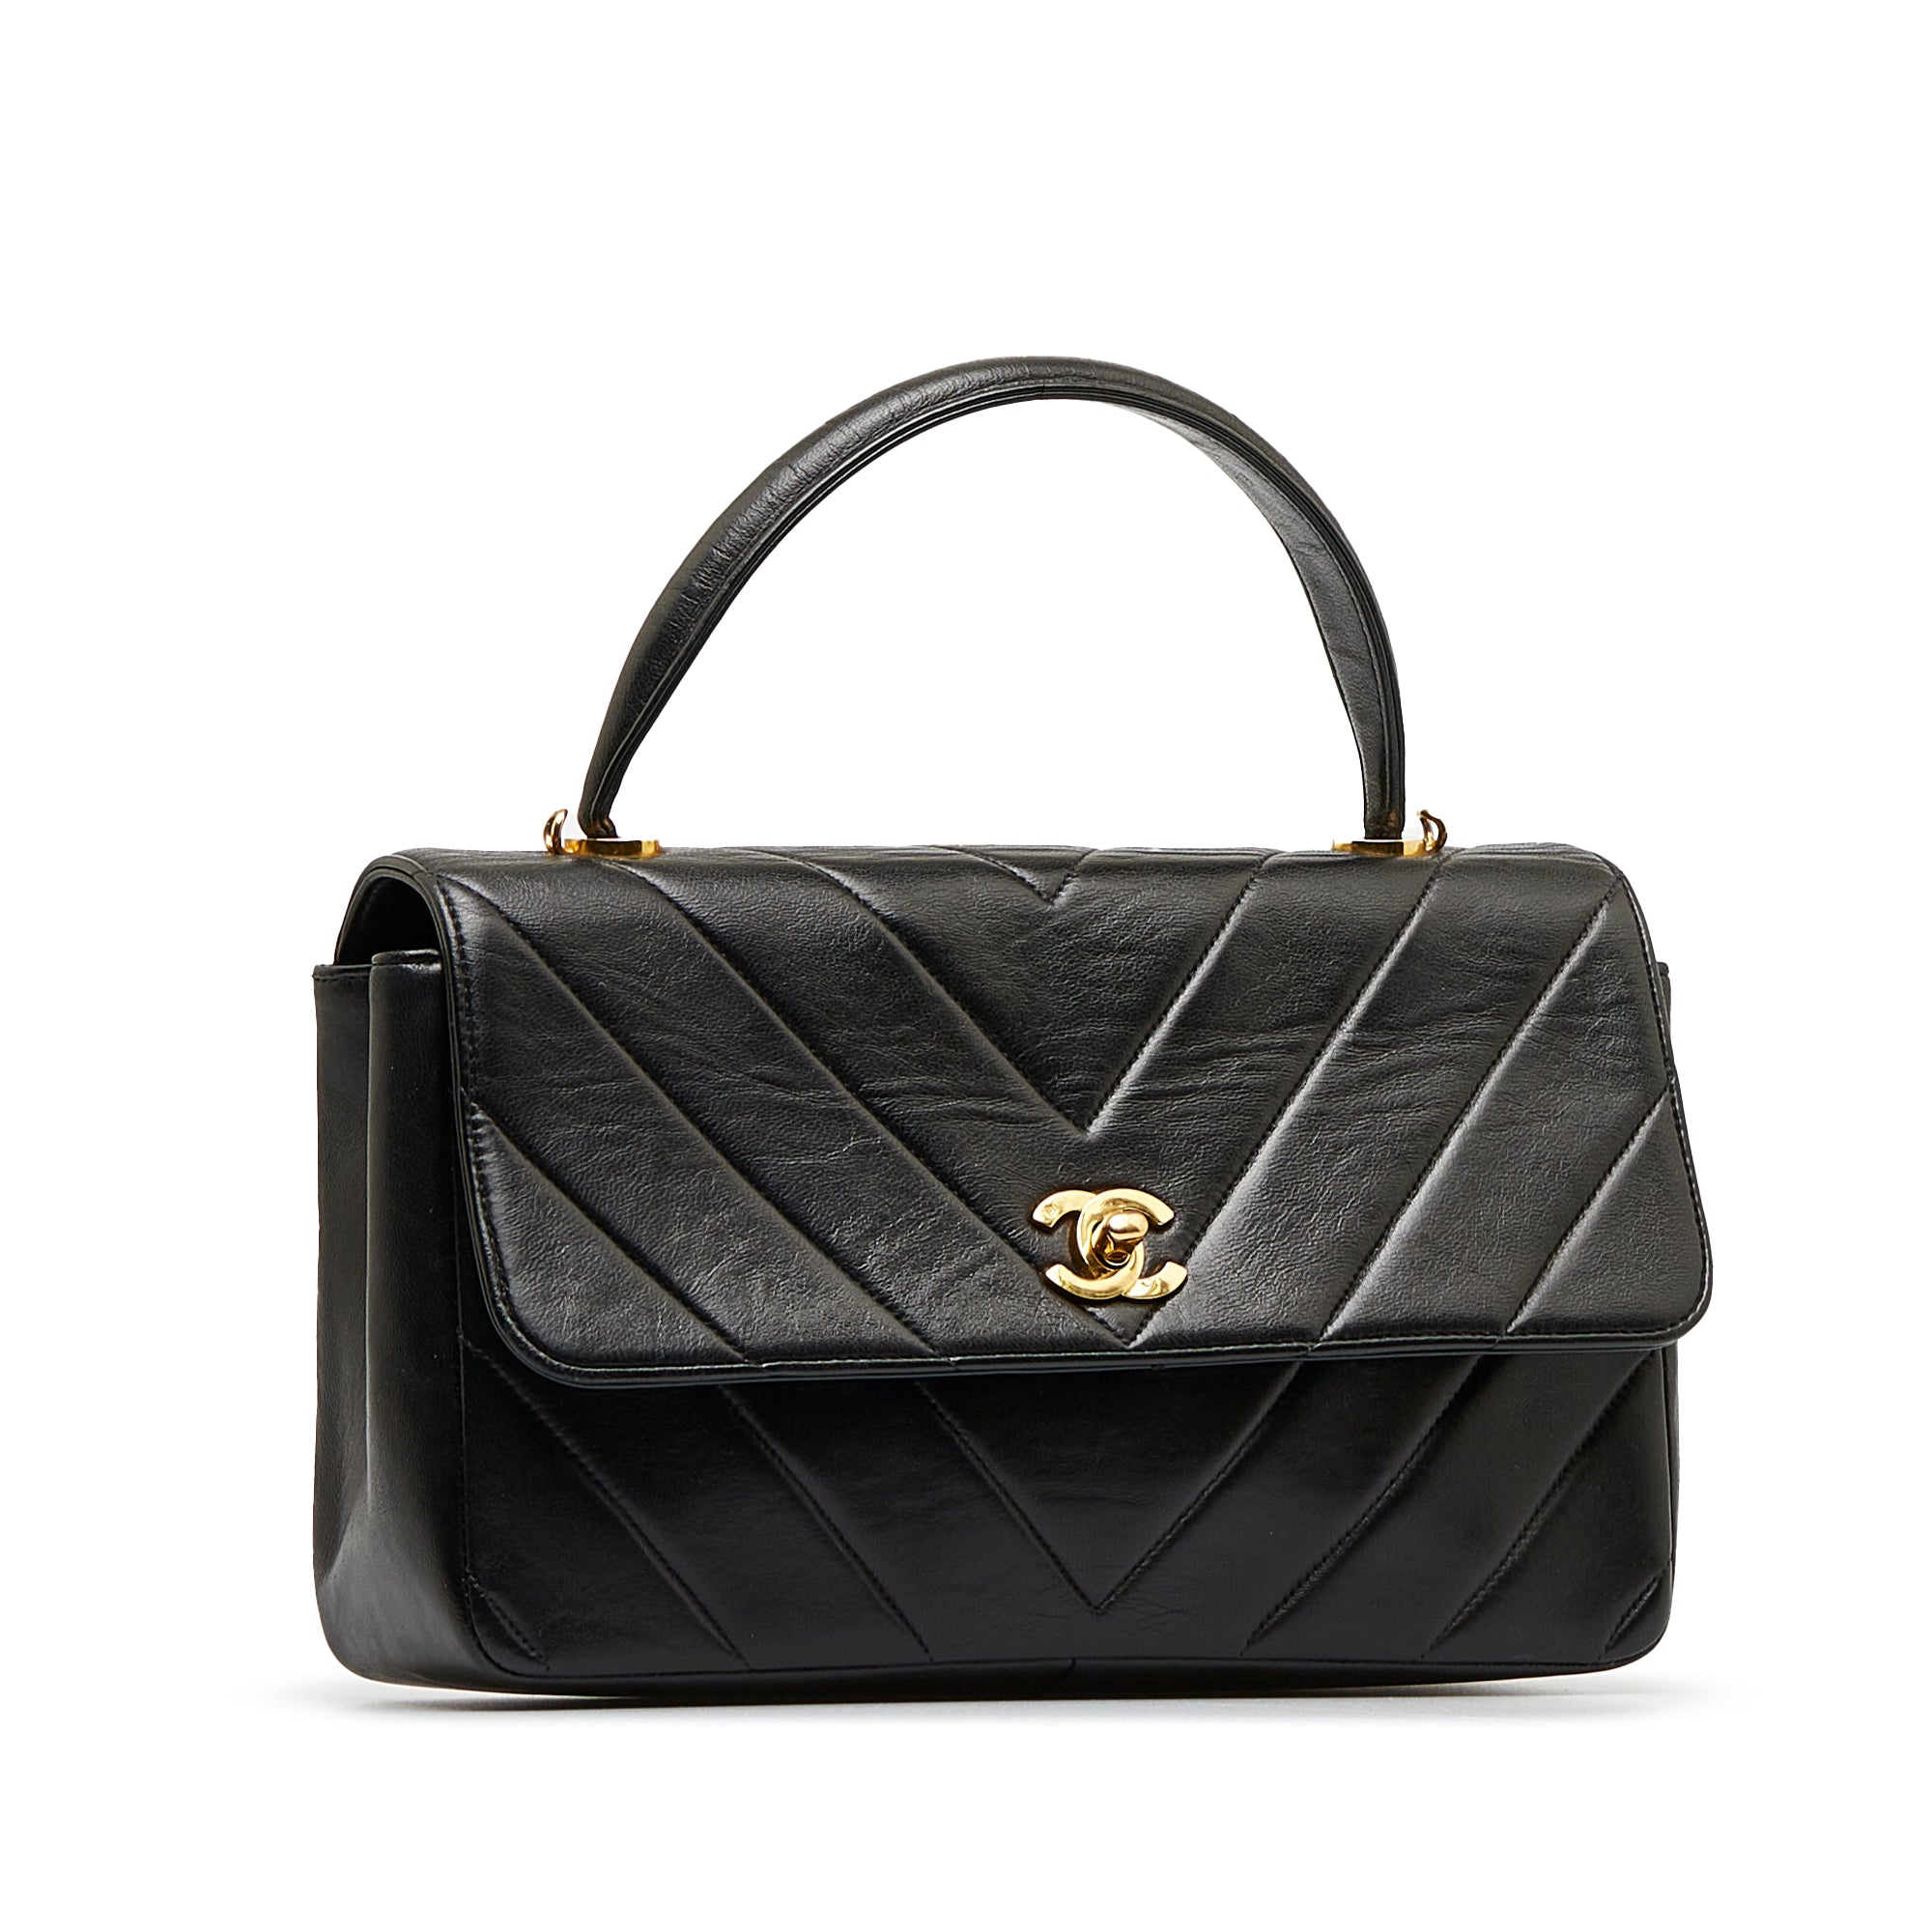 Black Chevron Flap Bag in Quilted Lambskin Leather with Gold tone